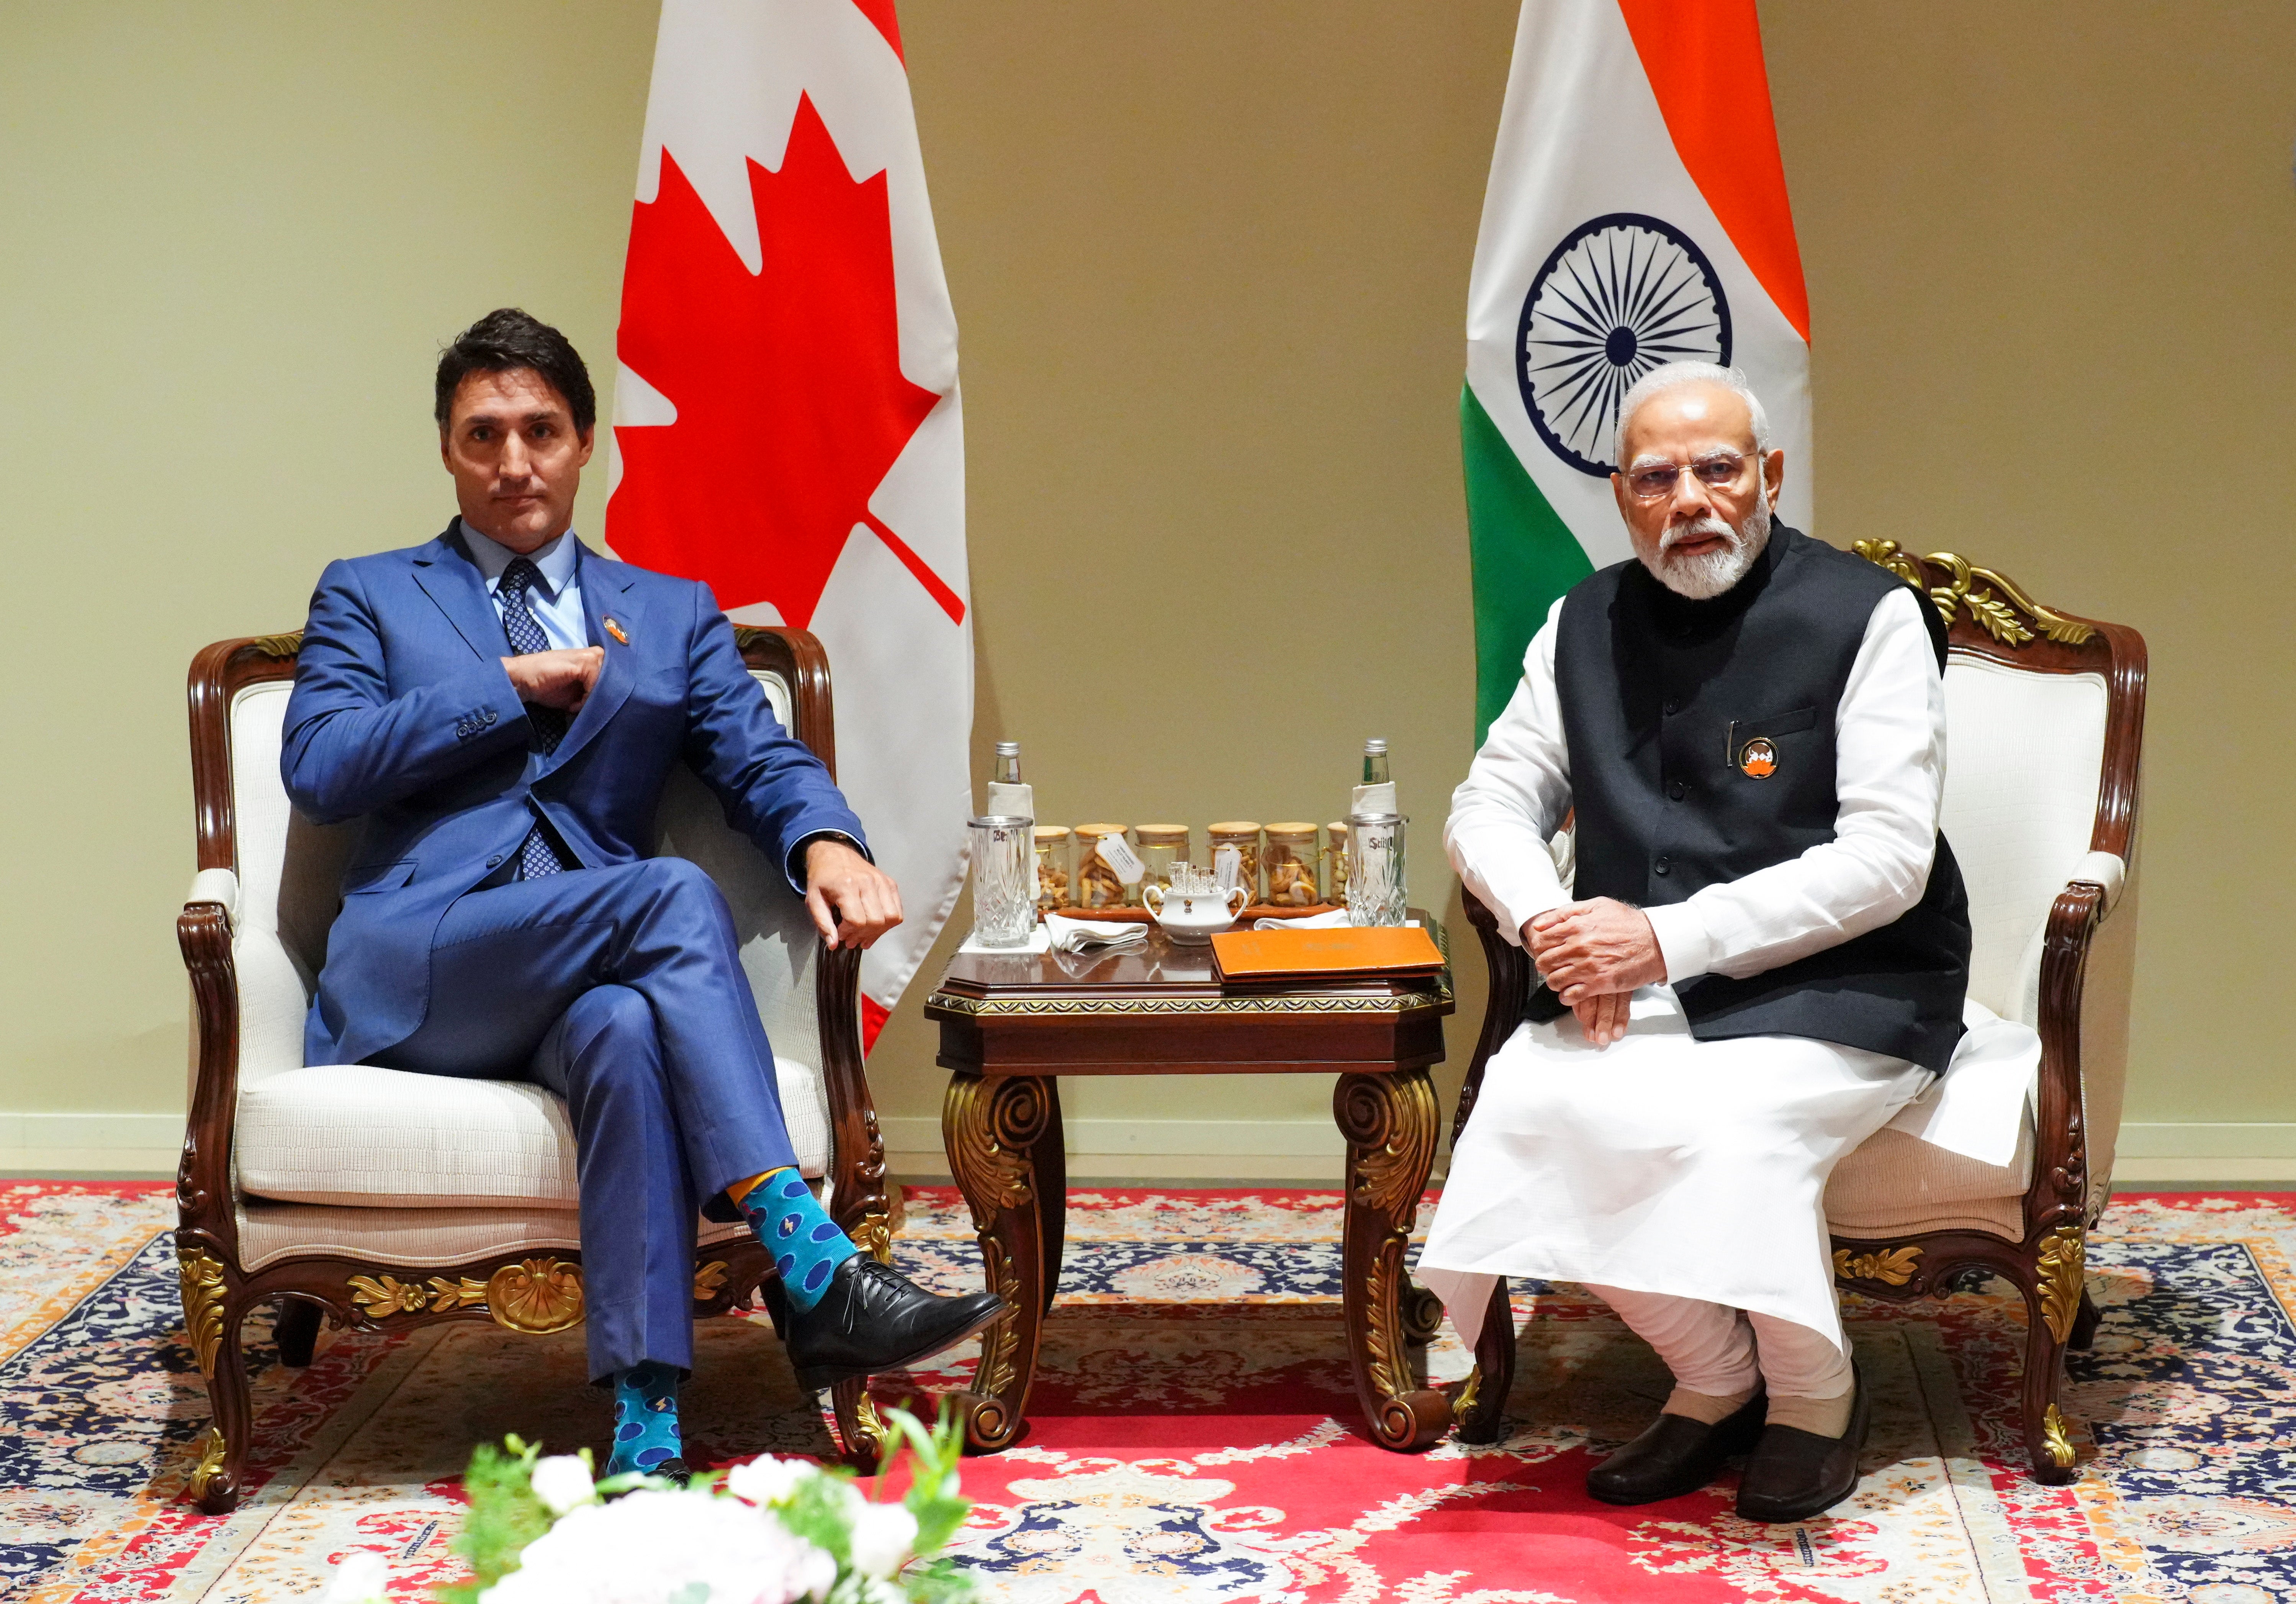 Canadian prime minister Justin Trudeau takes part in a meeting with Indian prime minister Narendra Modi during the G20 Summit